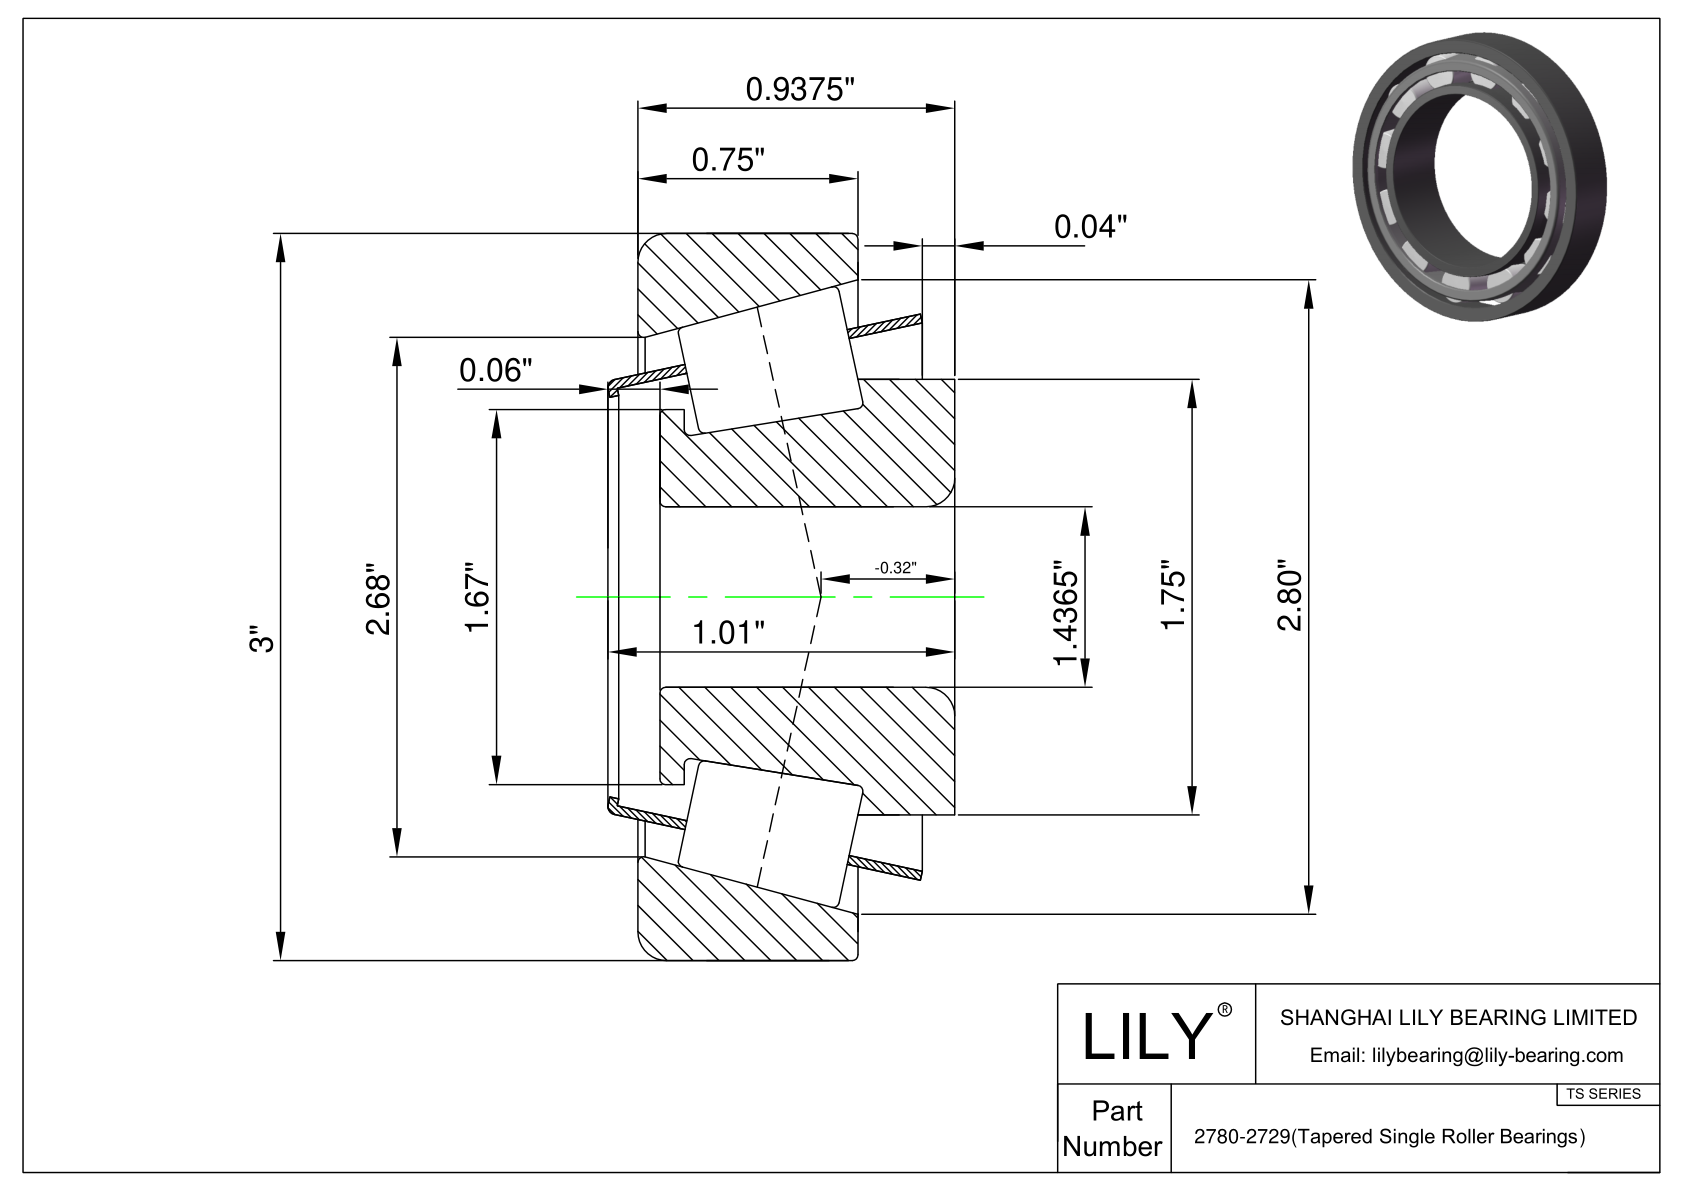 2780-2729 TS (Tapered Single Roller Bearings) (Imperial) cad drawing